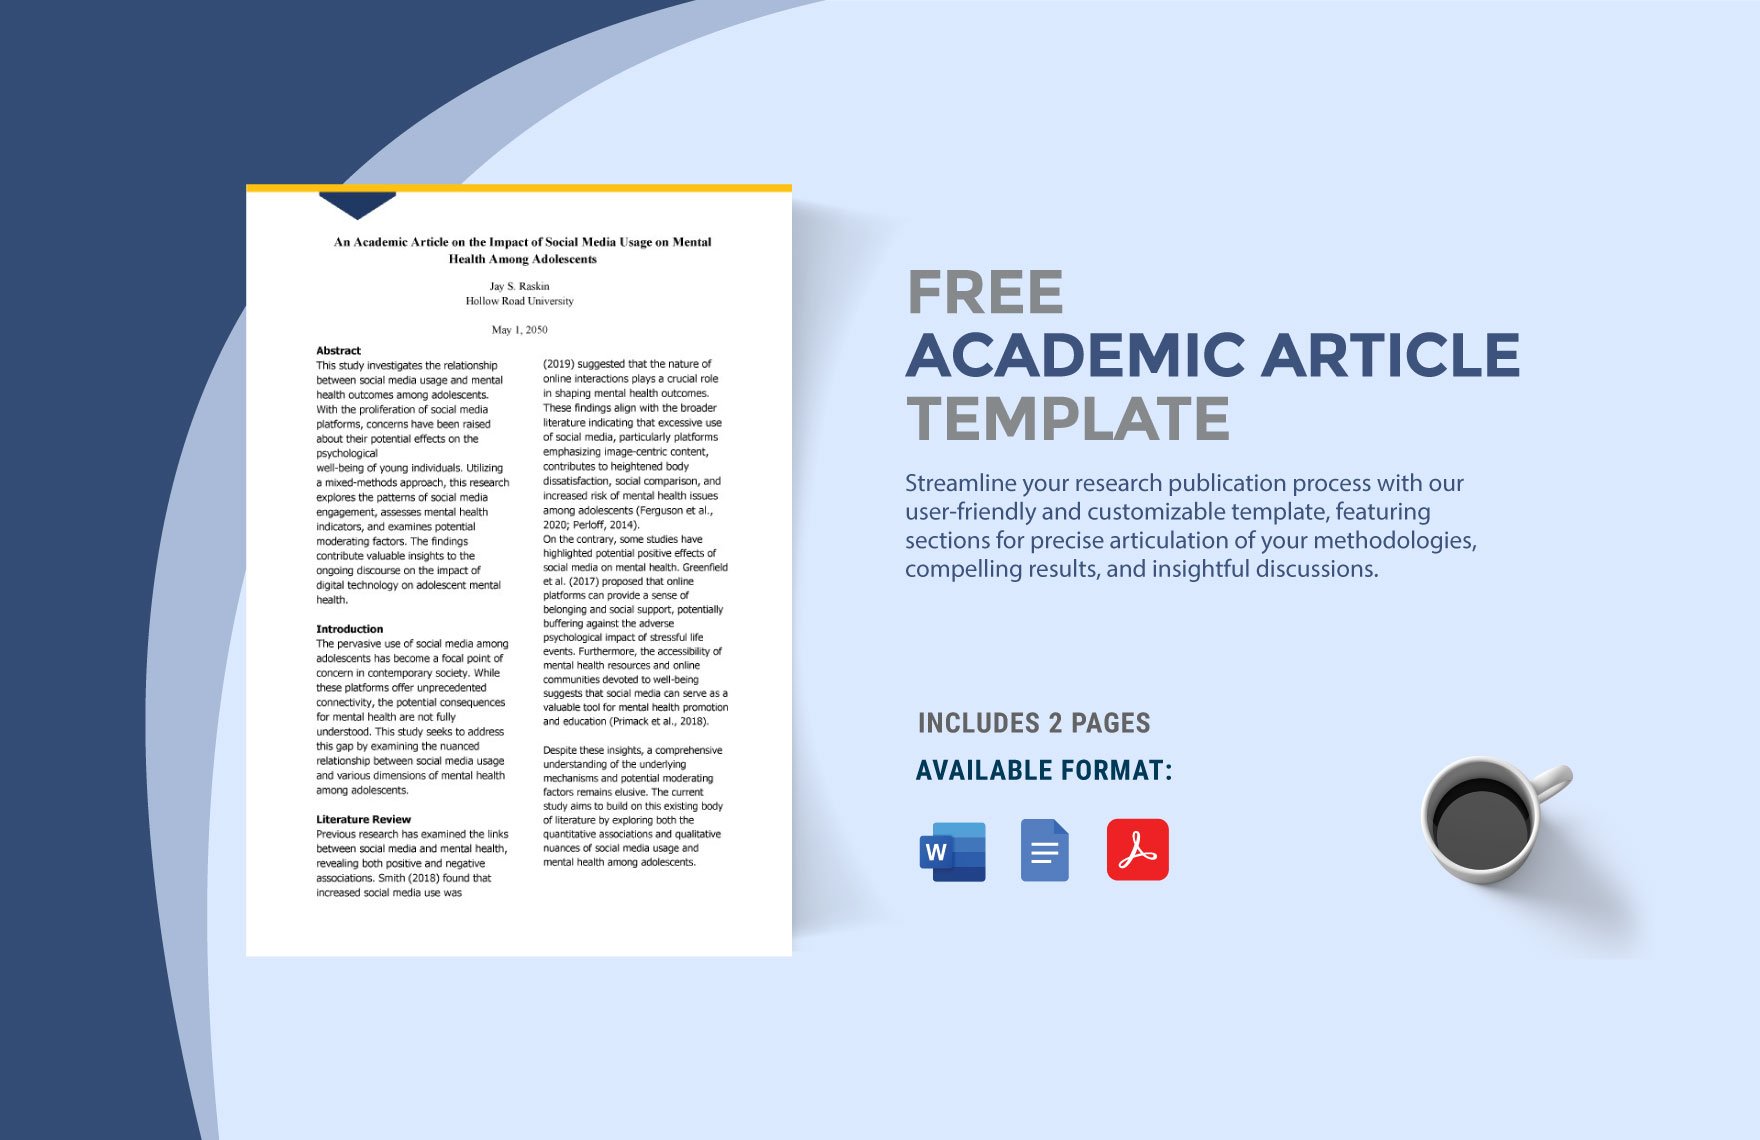 Free Academic Article Template in Word, Google Docs, PDF, PNG